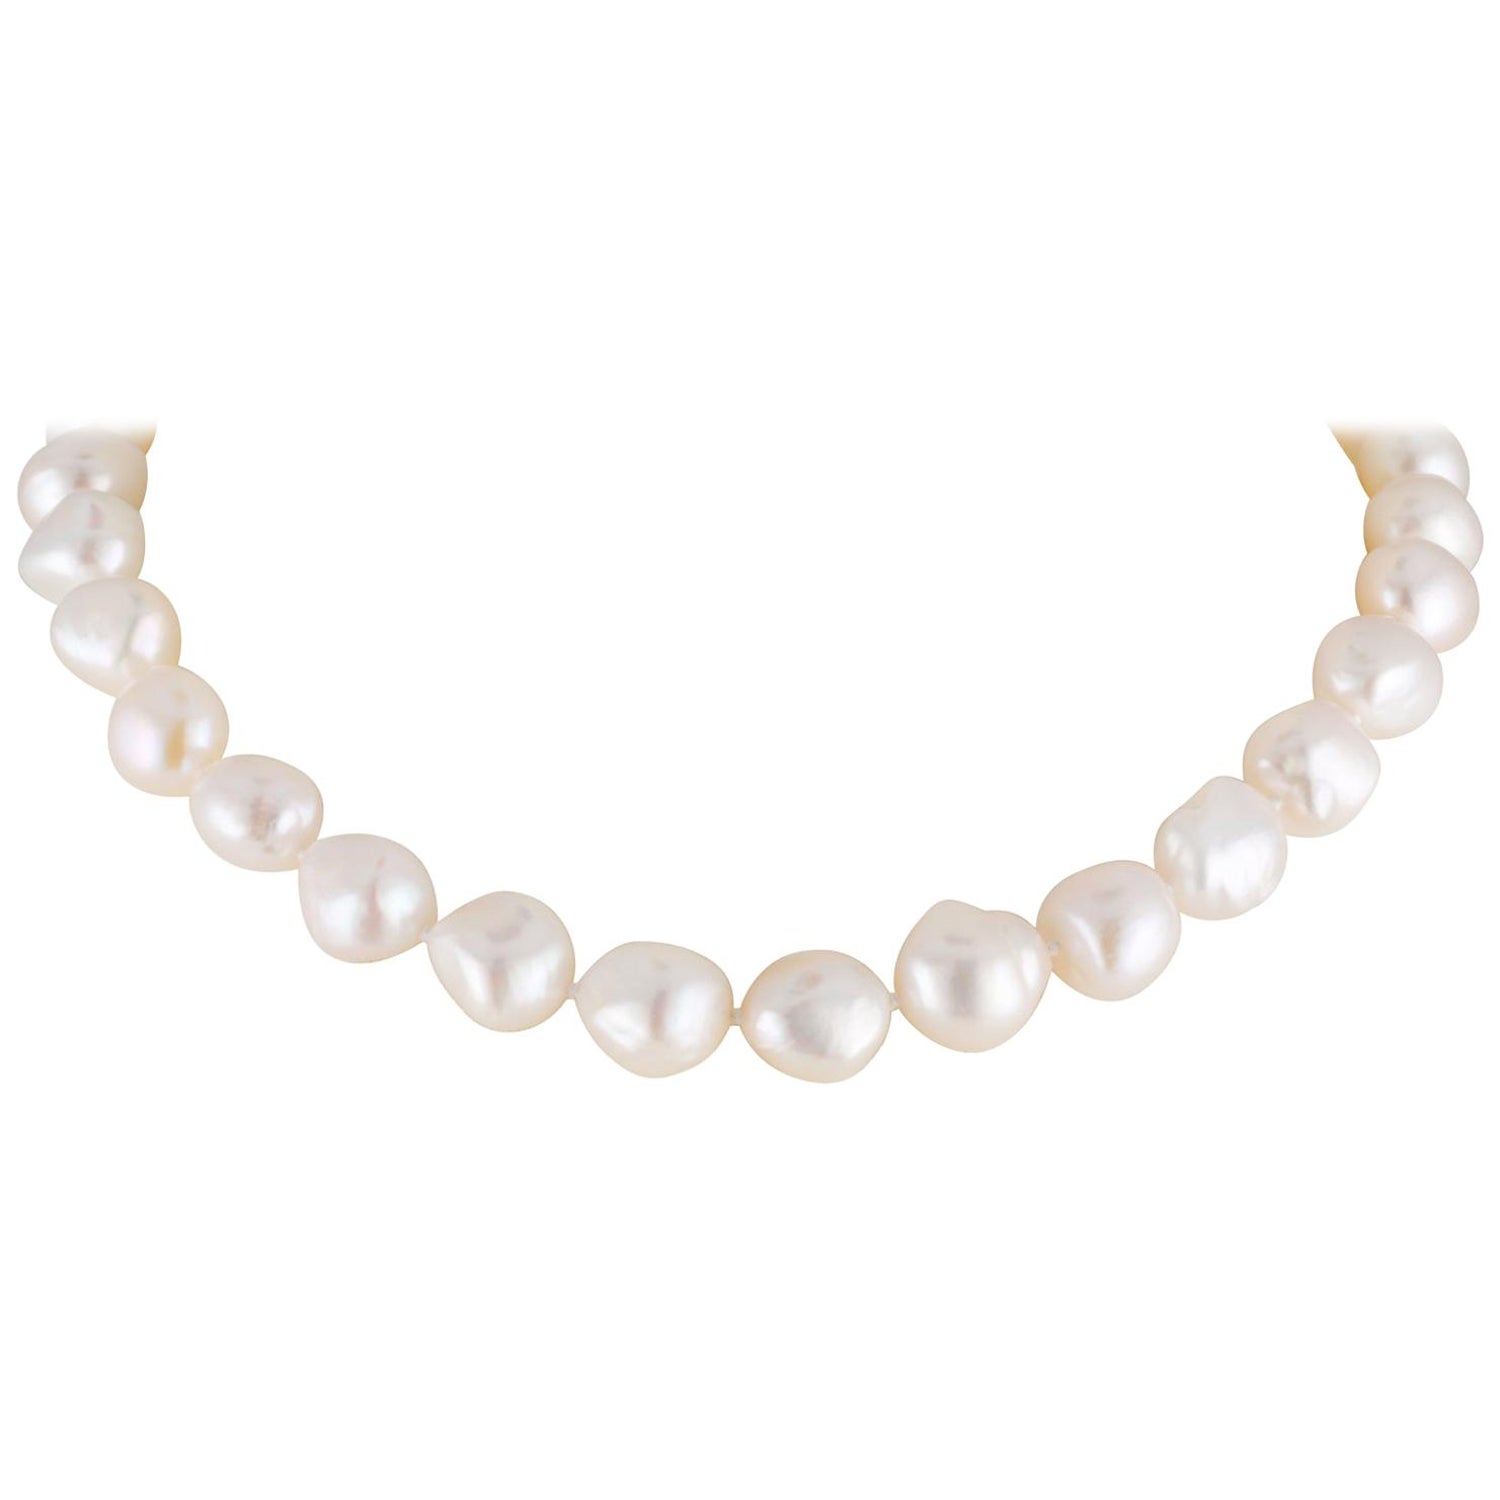 Baroque White Freshwater Cultured 12-13mm Single Pearl Chain Necklace 18 inches 